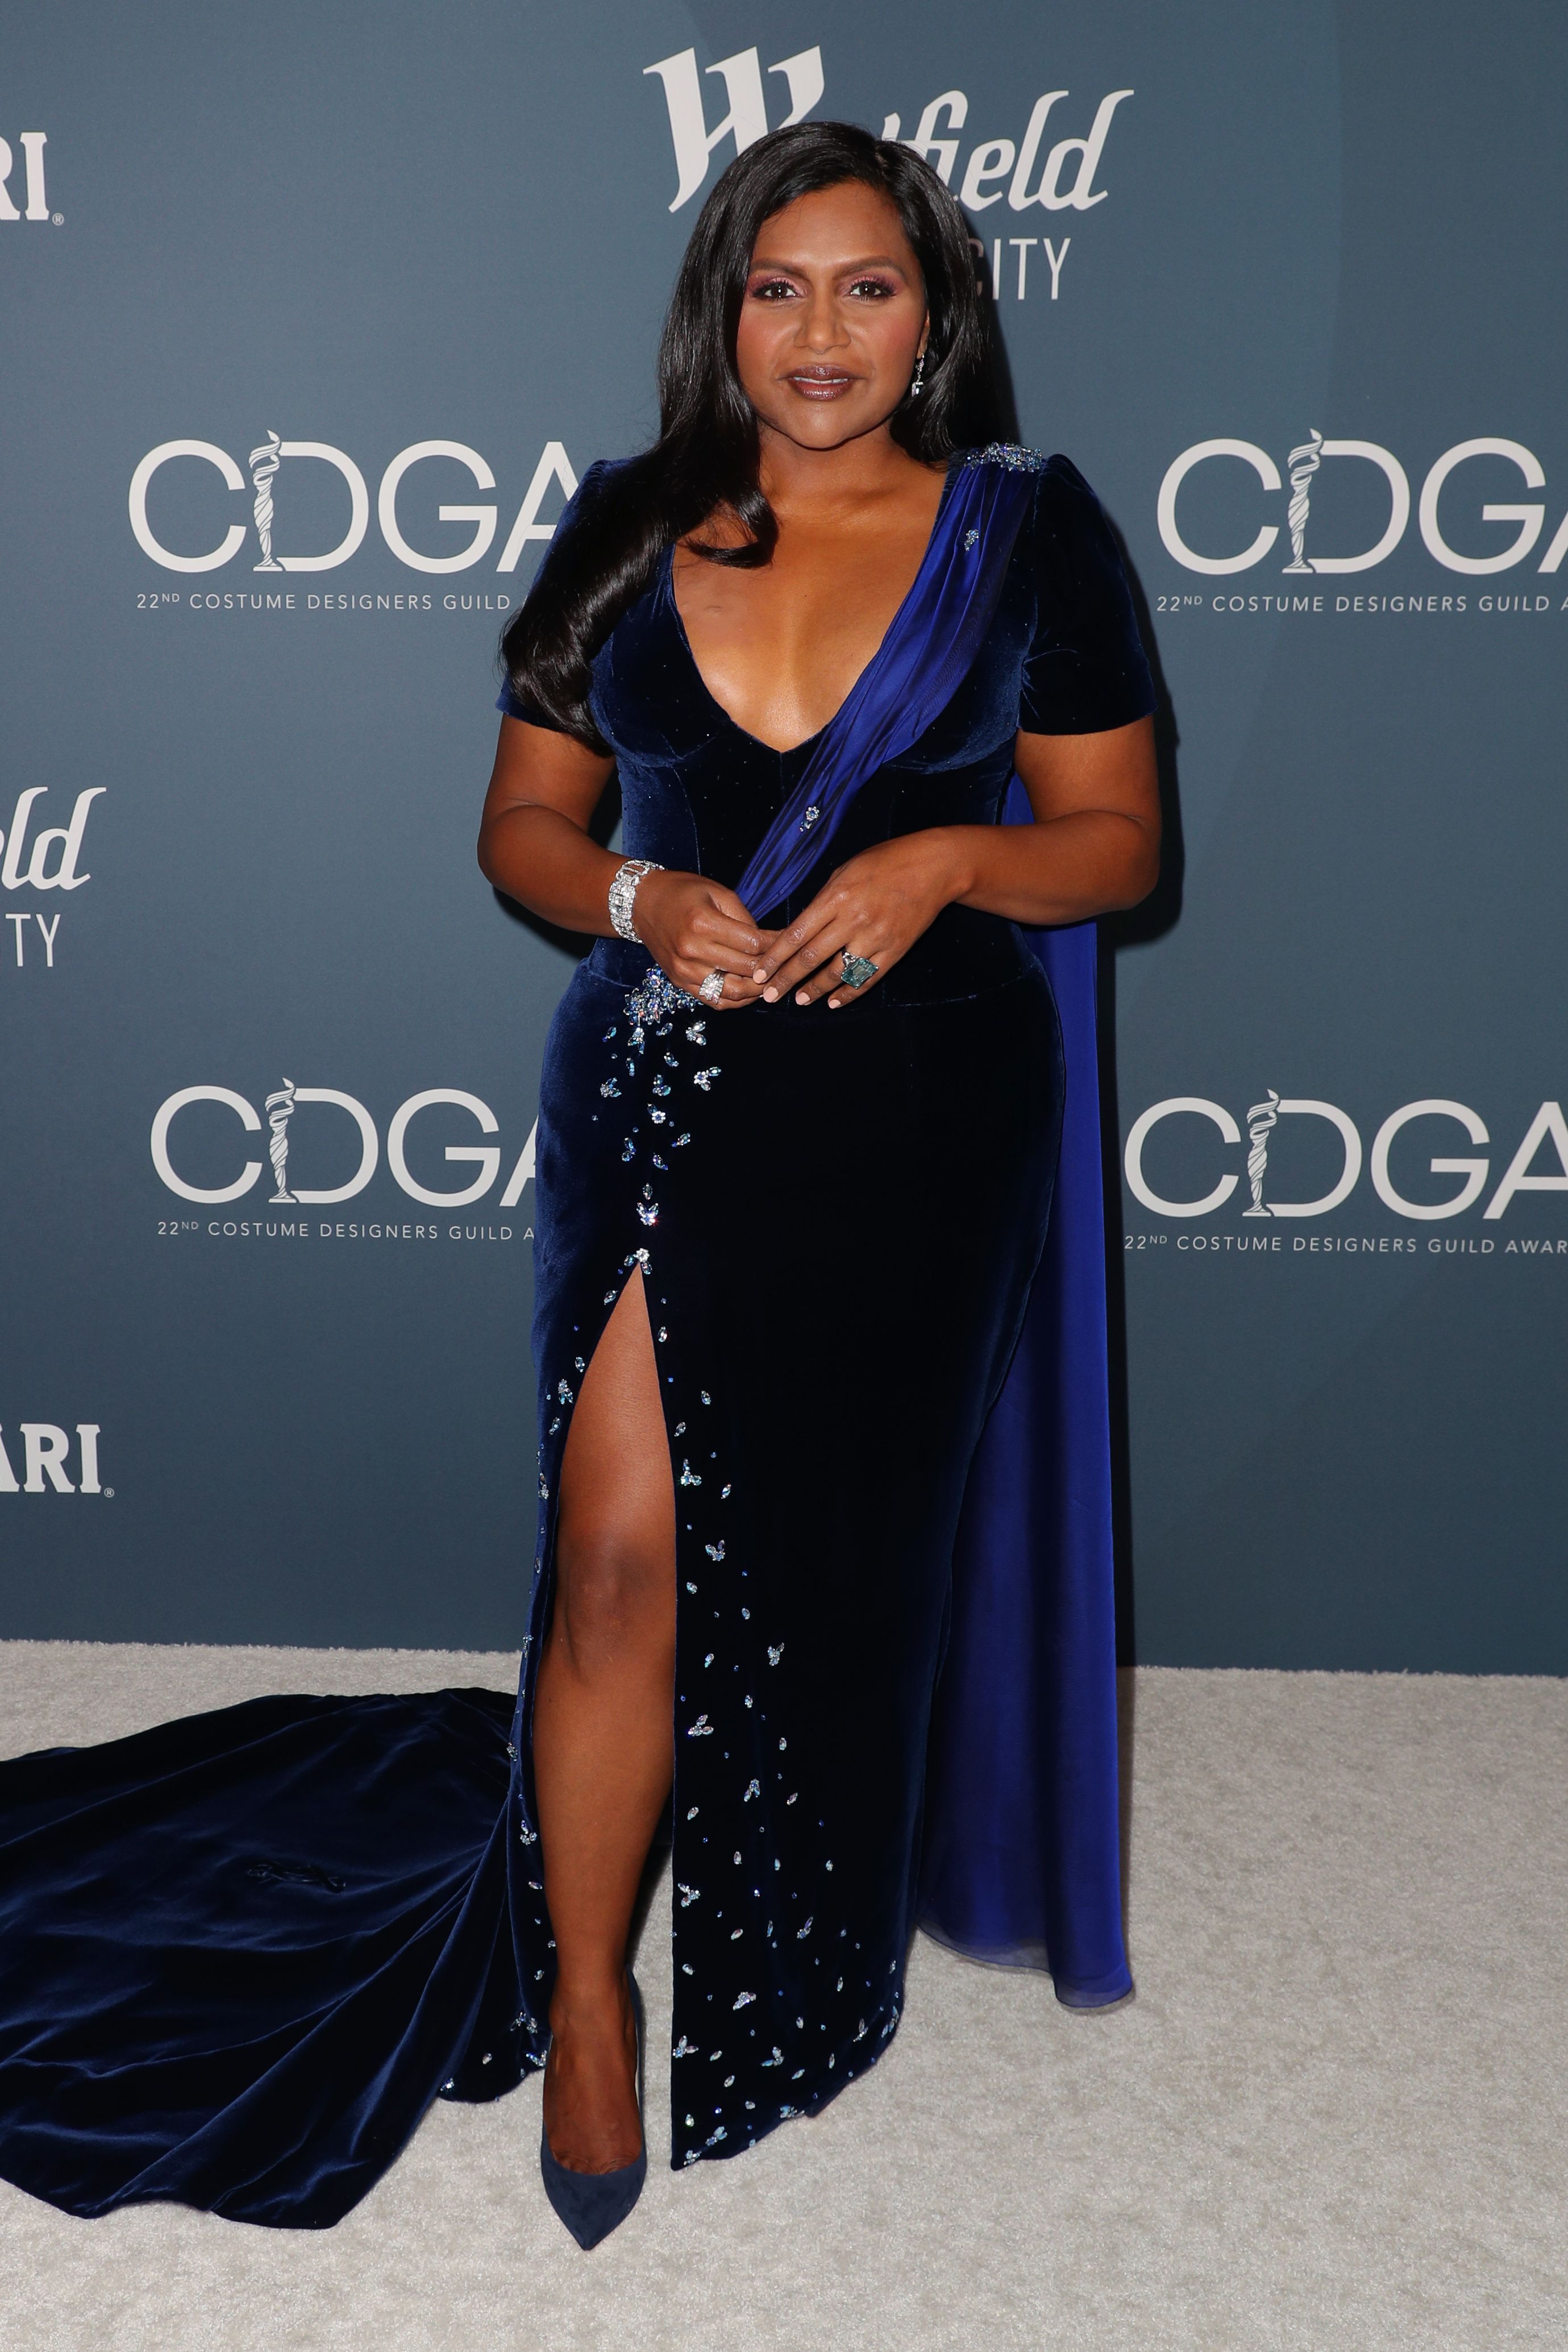 Mindy Kaling Braless Outfits: Photos Without a Bra